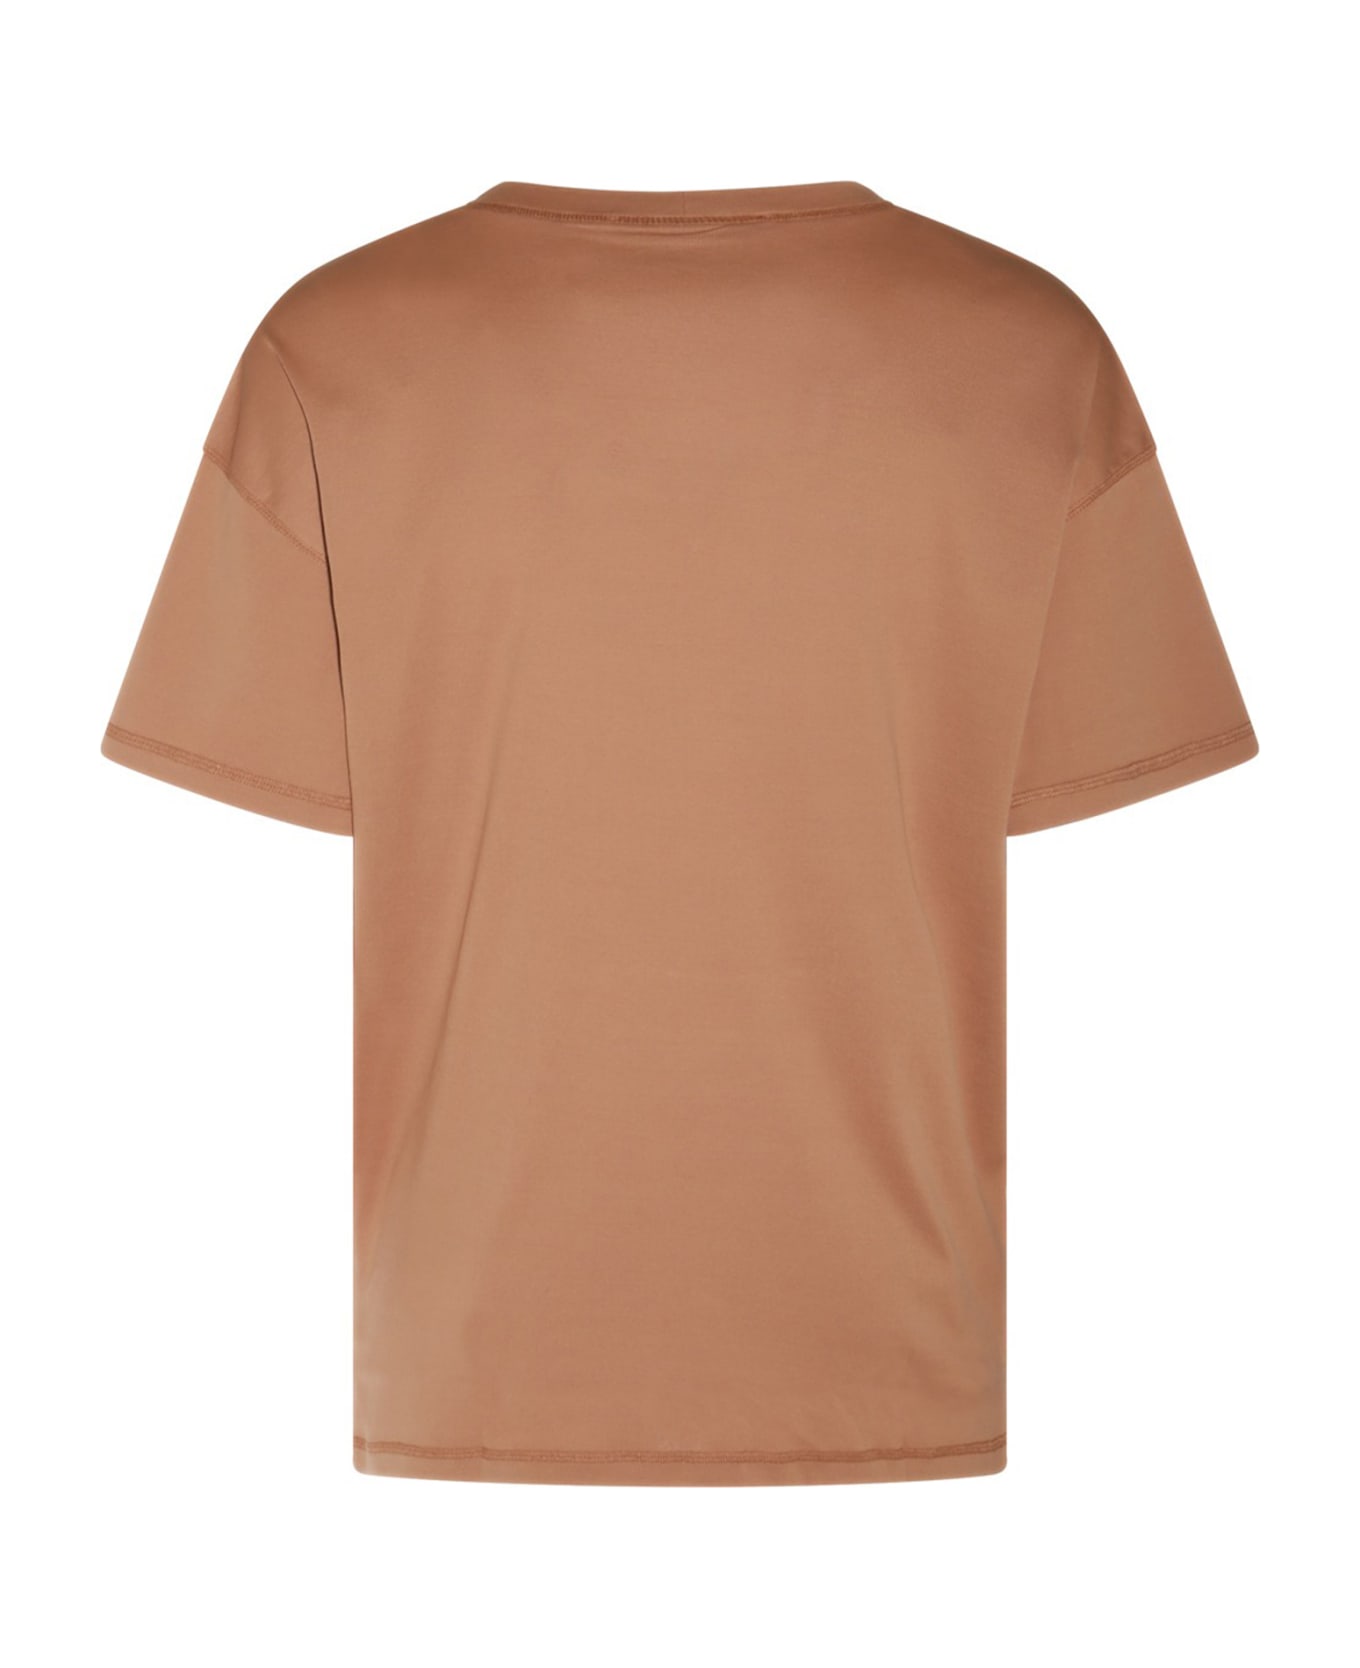 Lemaire T-Shirt - SAND Tシャツ